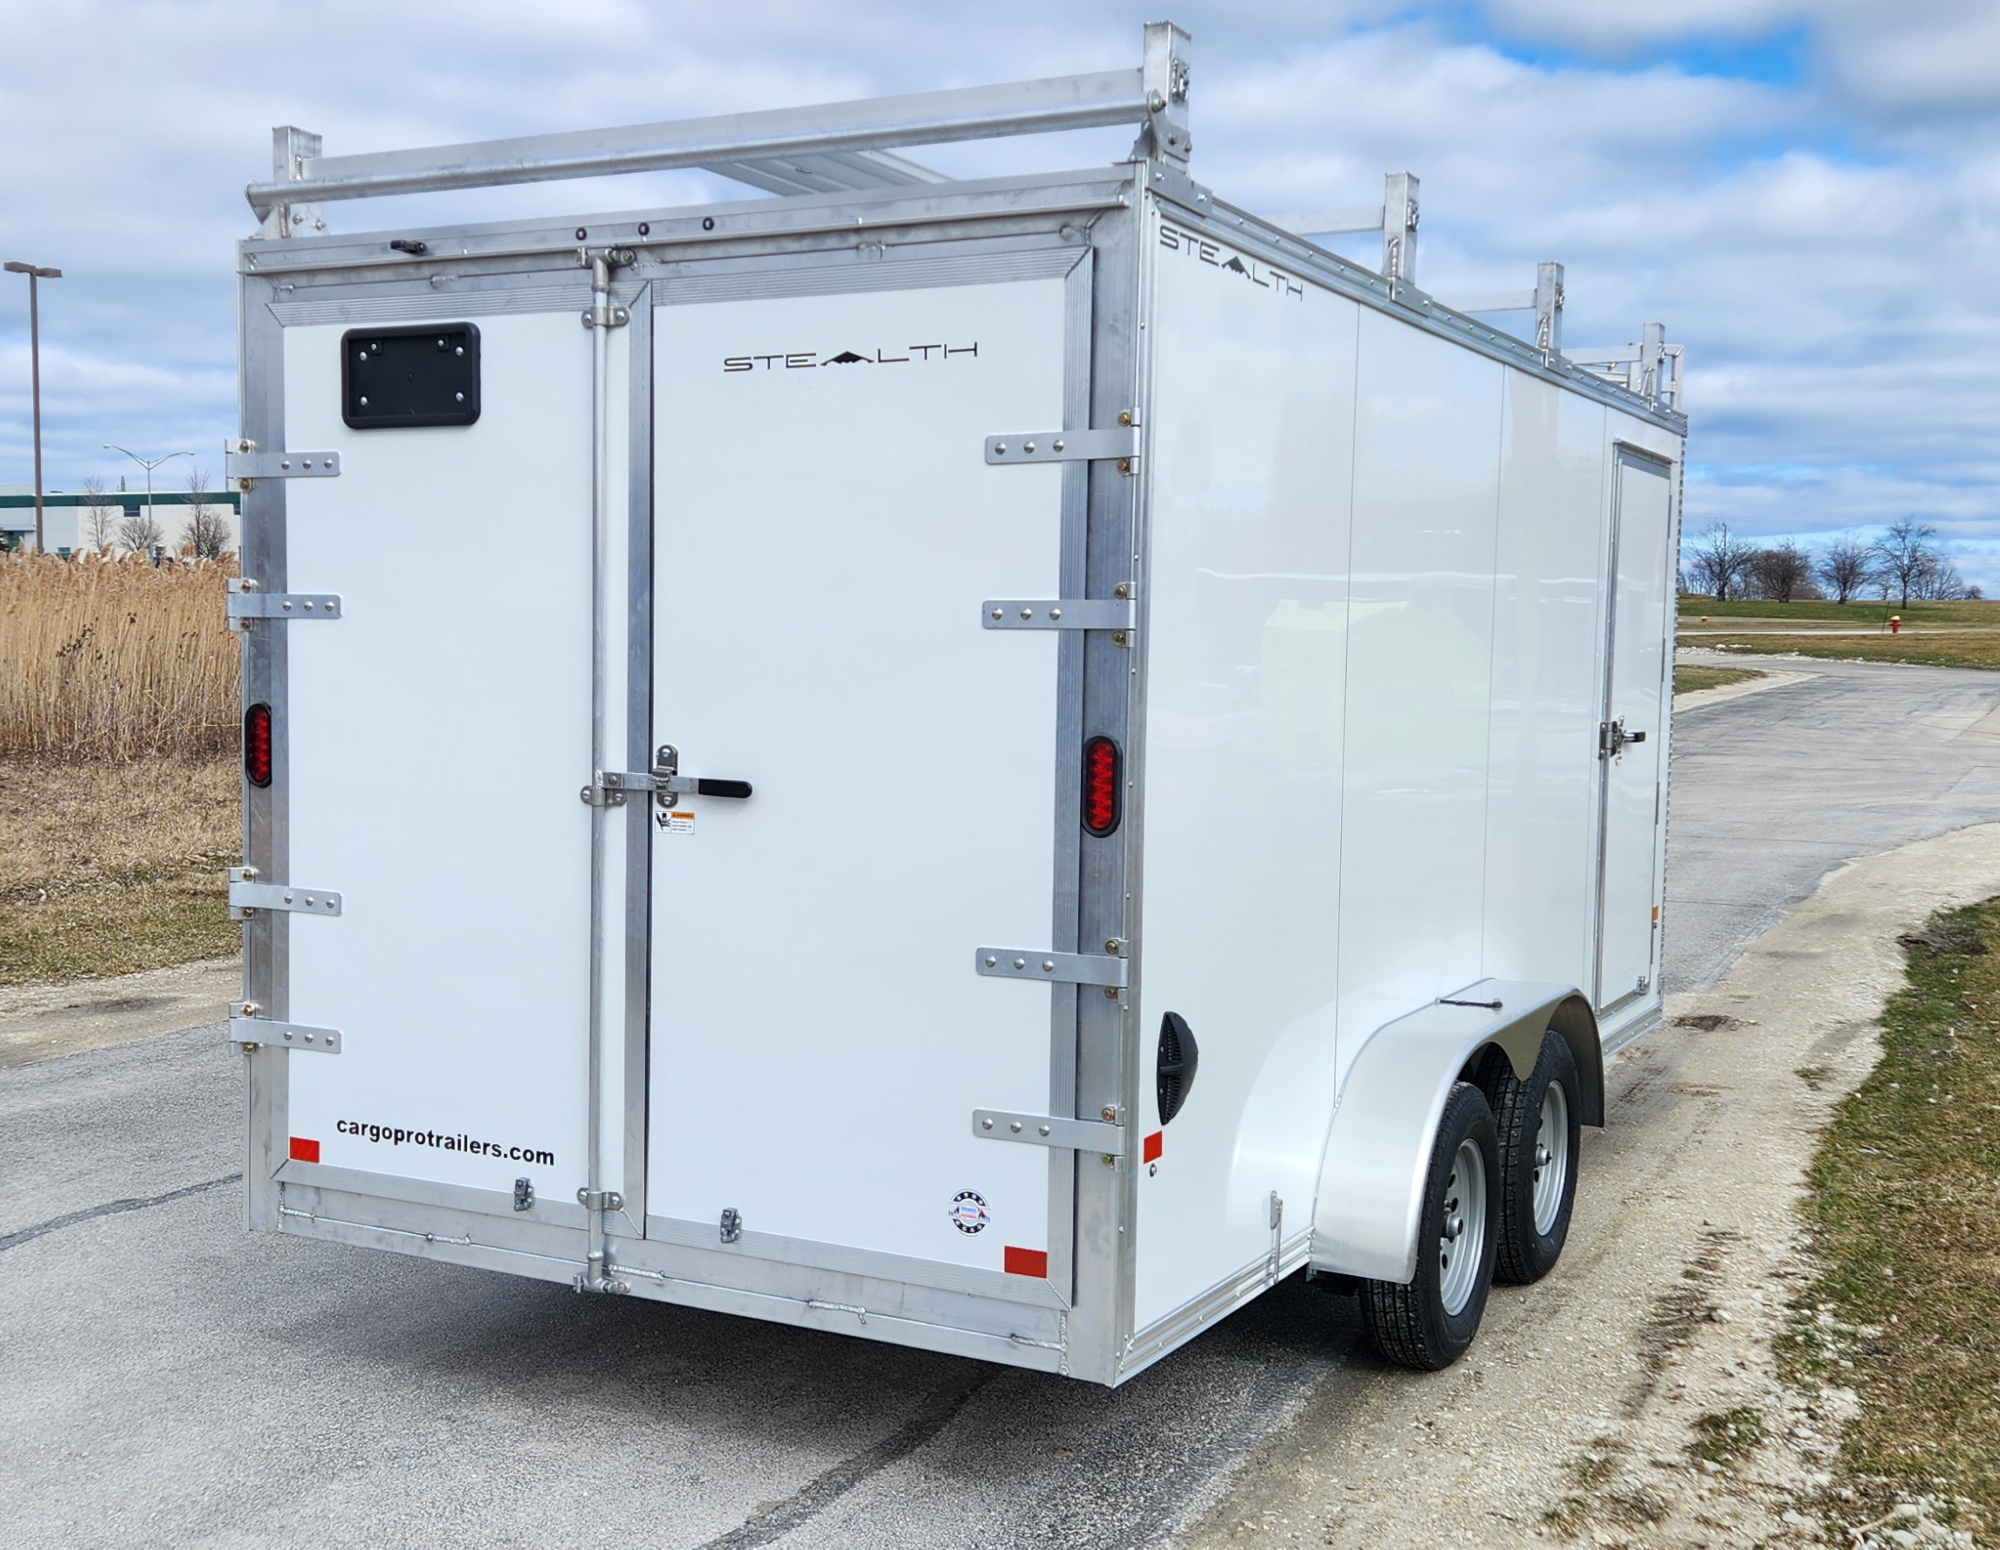 CargoPro Stealth 7 X 16 Aluminum Frame Tandem Axle Contractor Cargo Trailer Double Rear Doors, 79 inch Interior Height- White